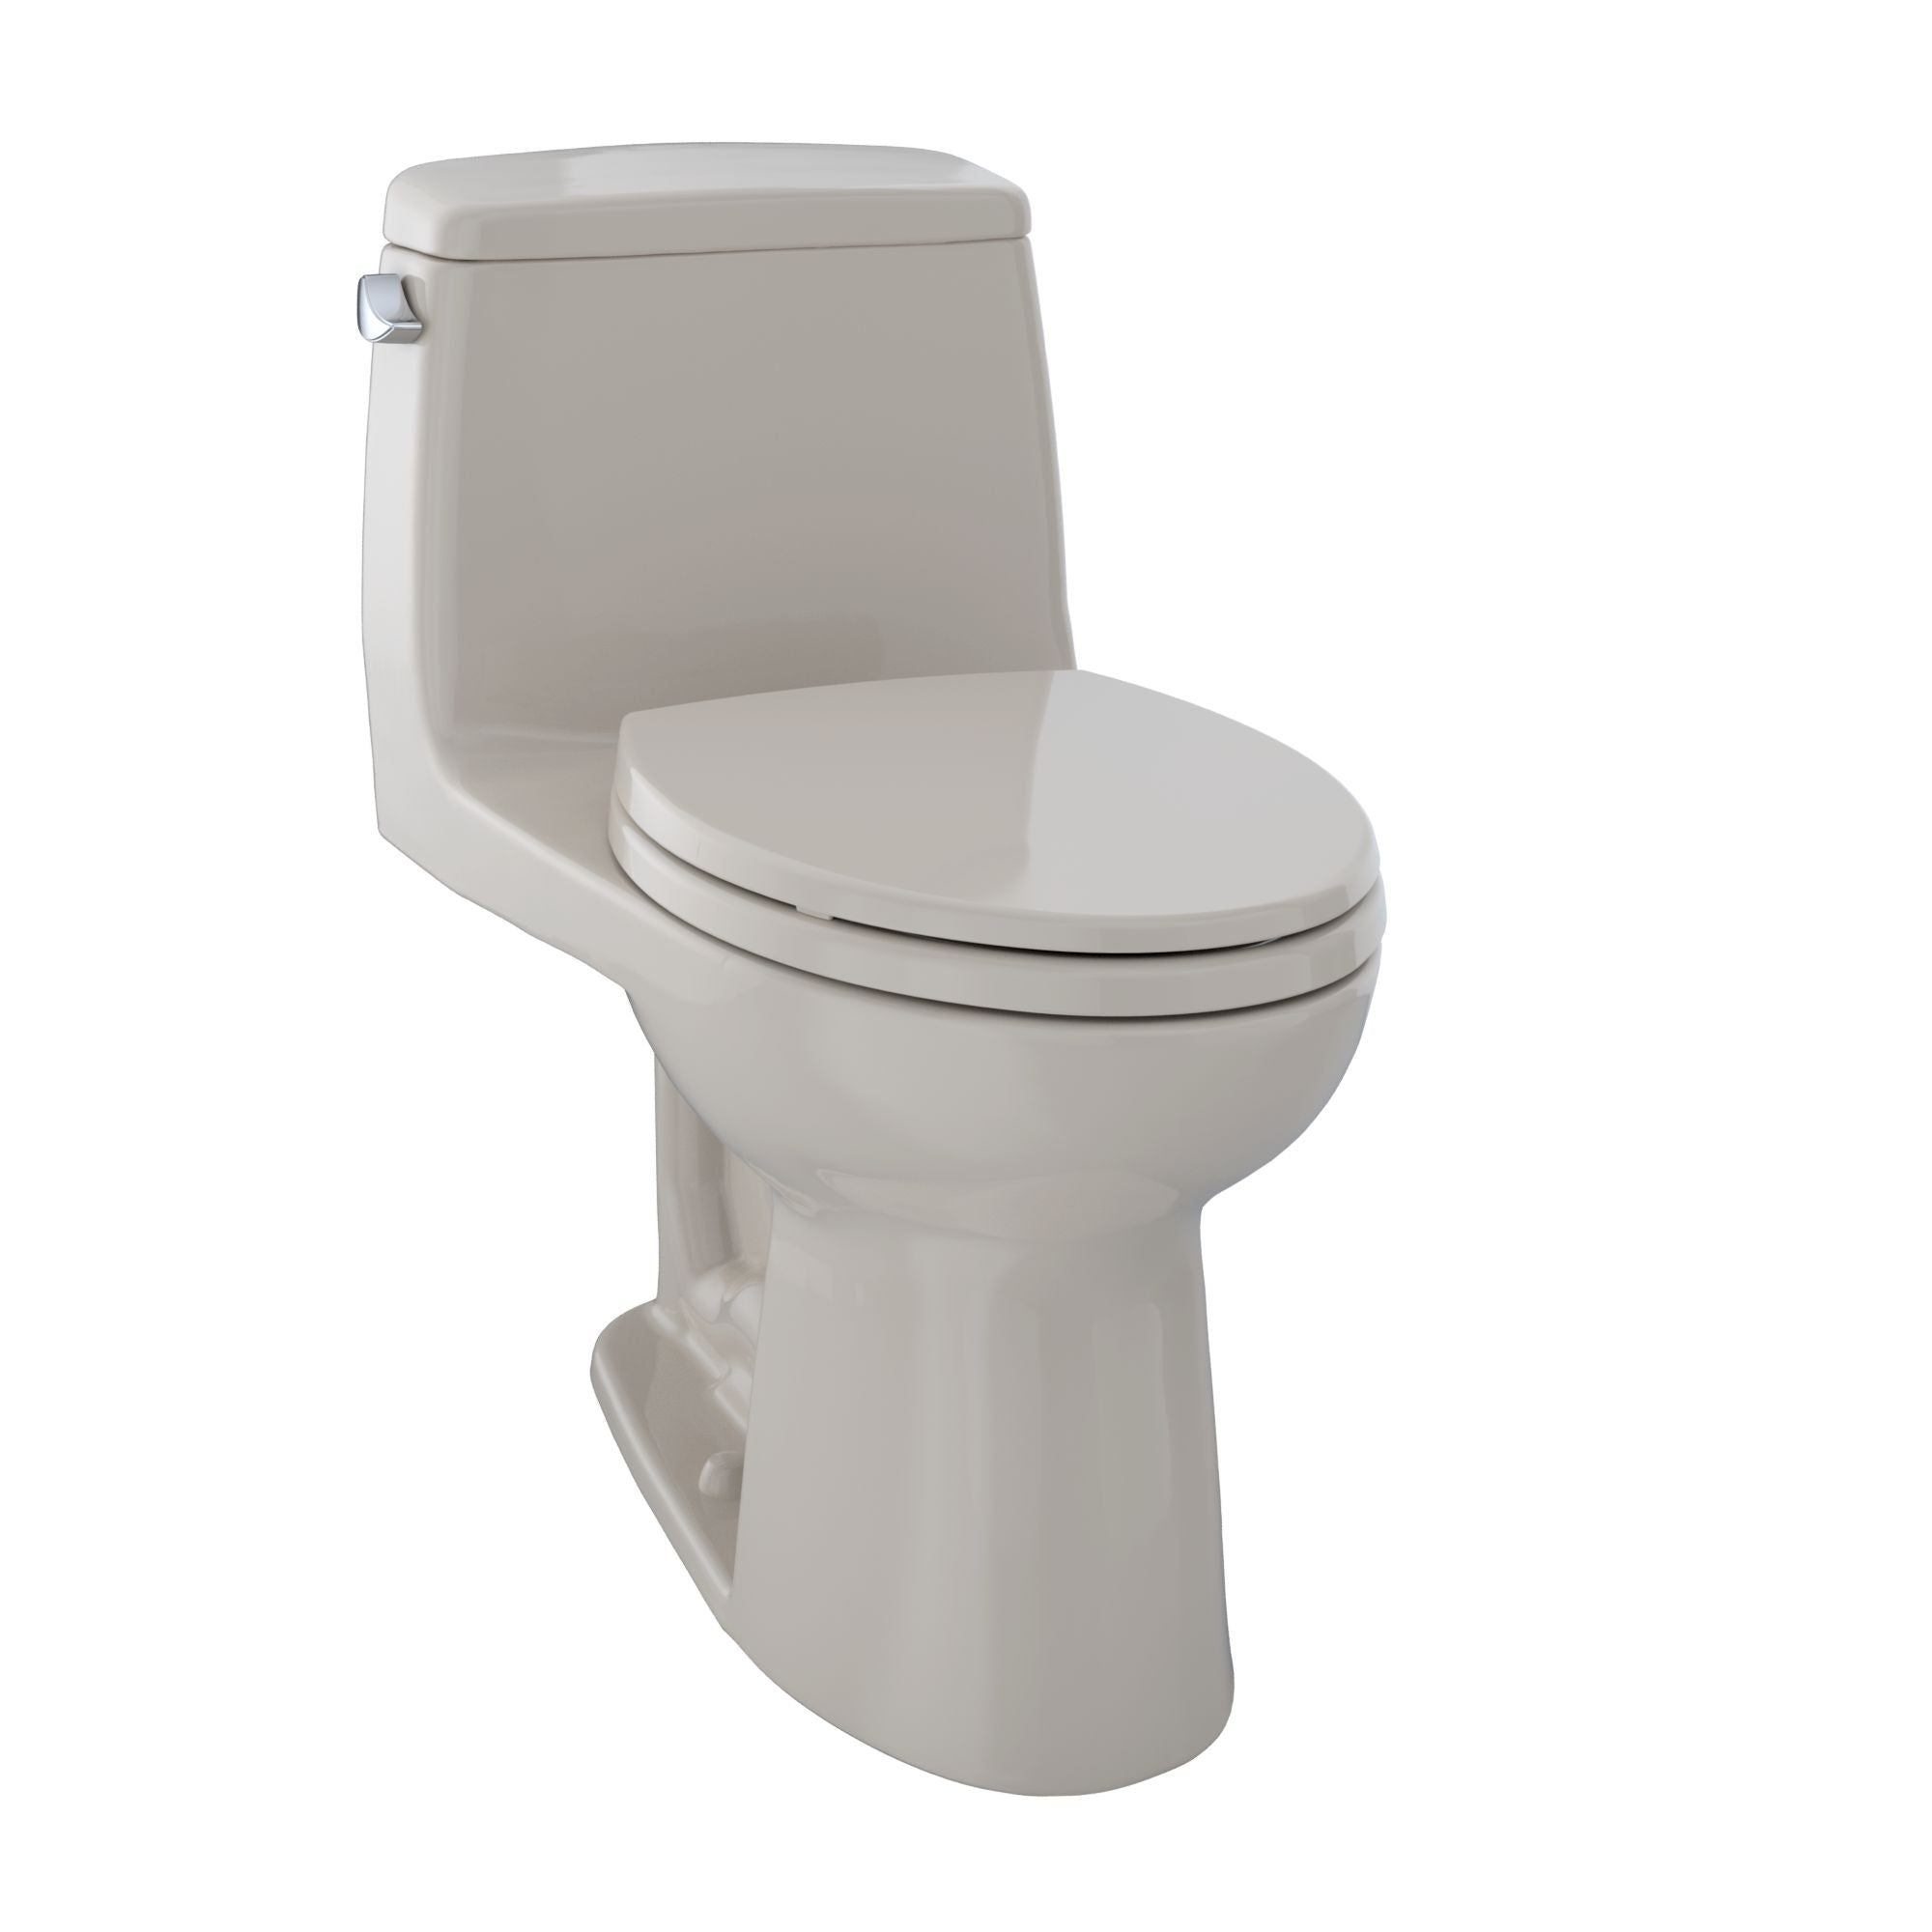 Toto Eco Ultramax One-piece Toilet 1.28 GPF Elongated Bowl